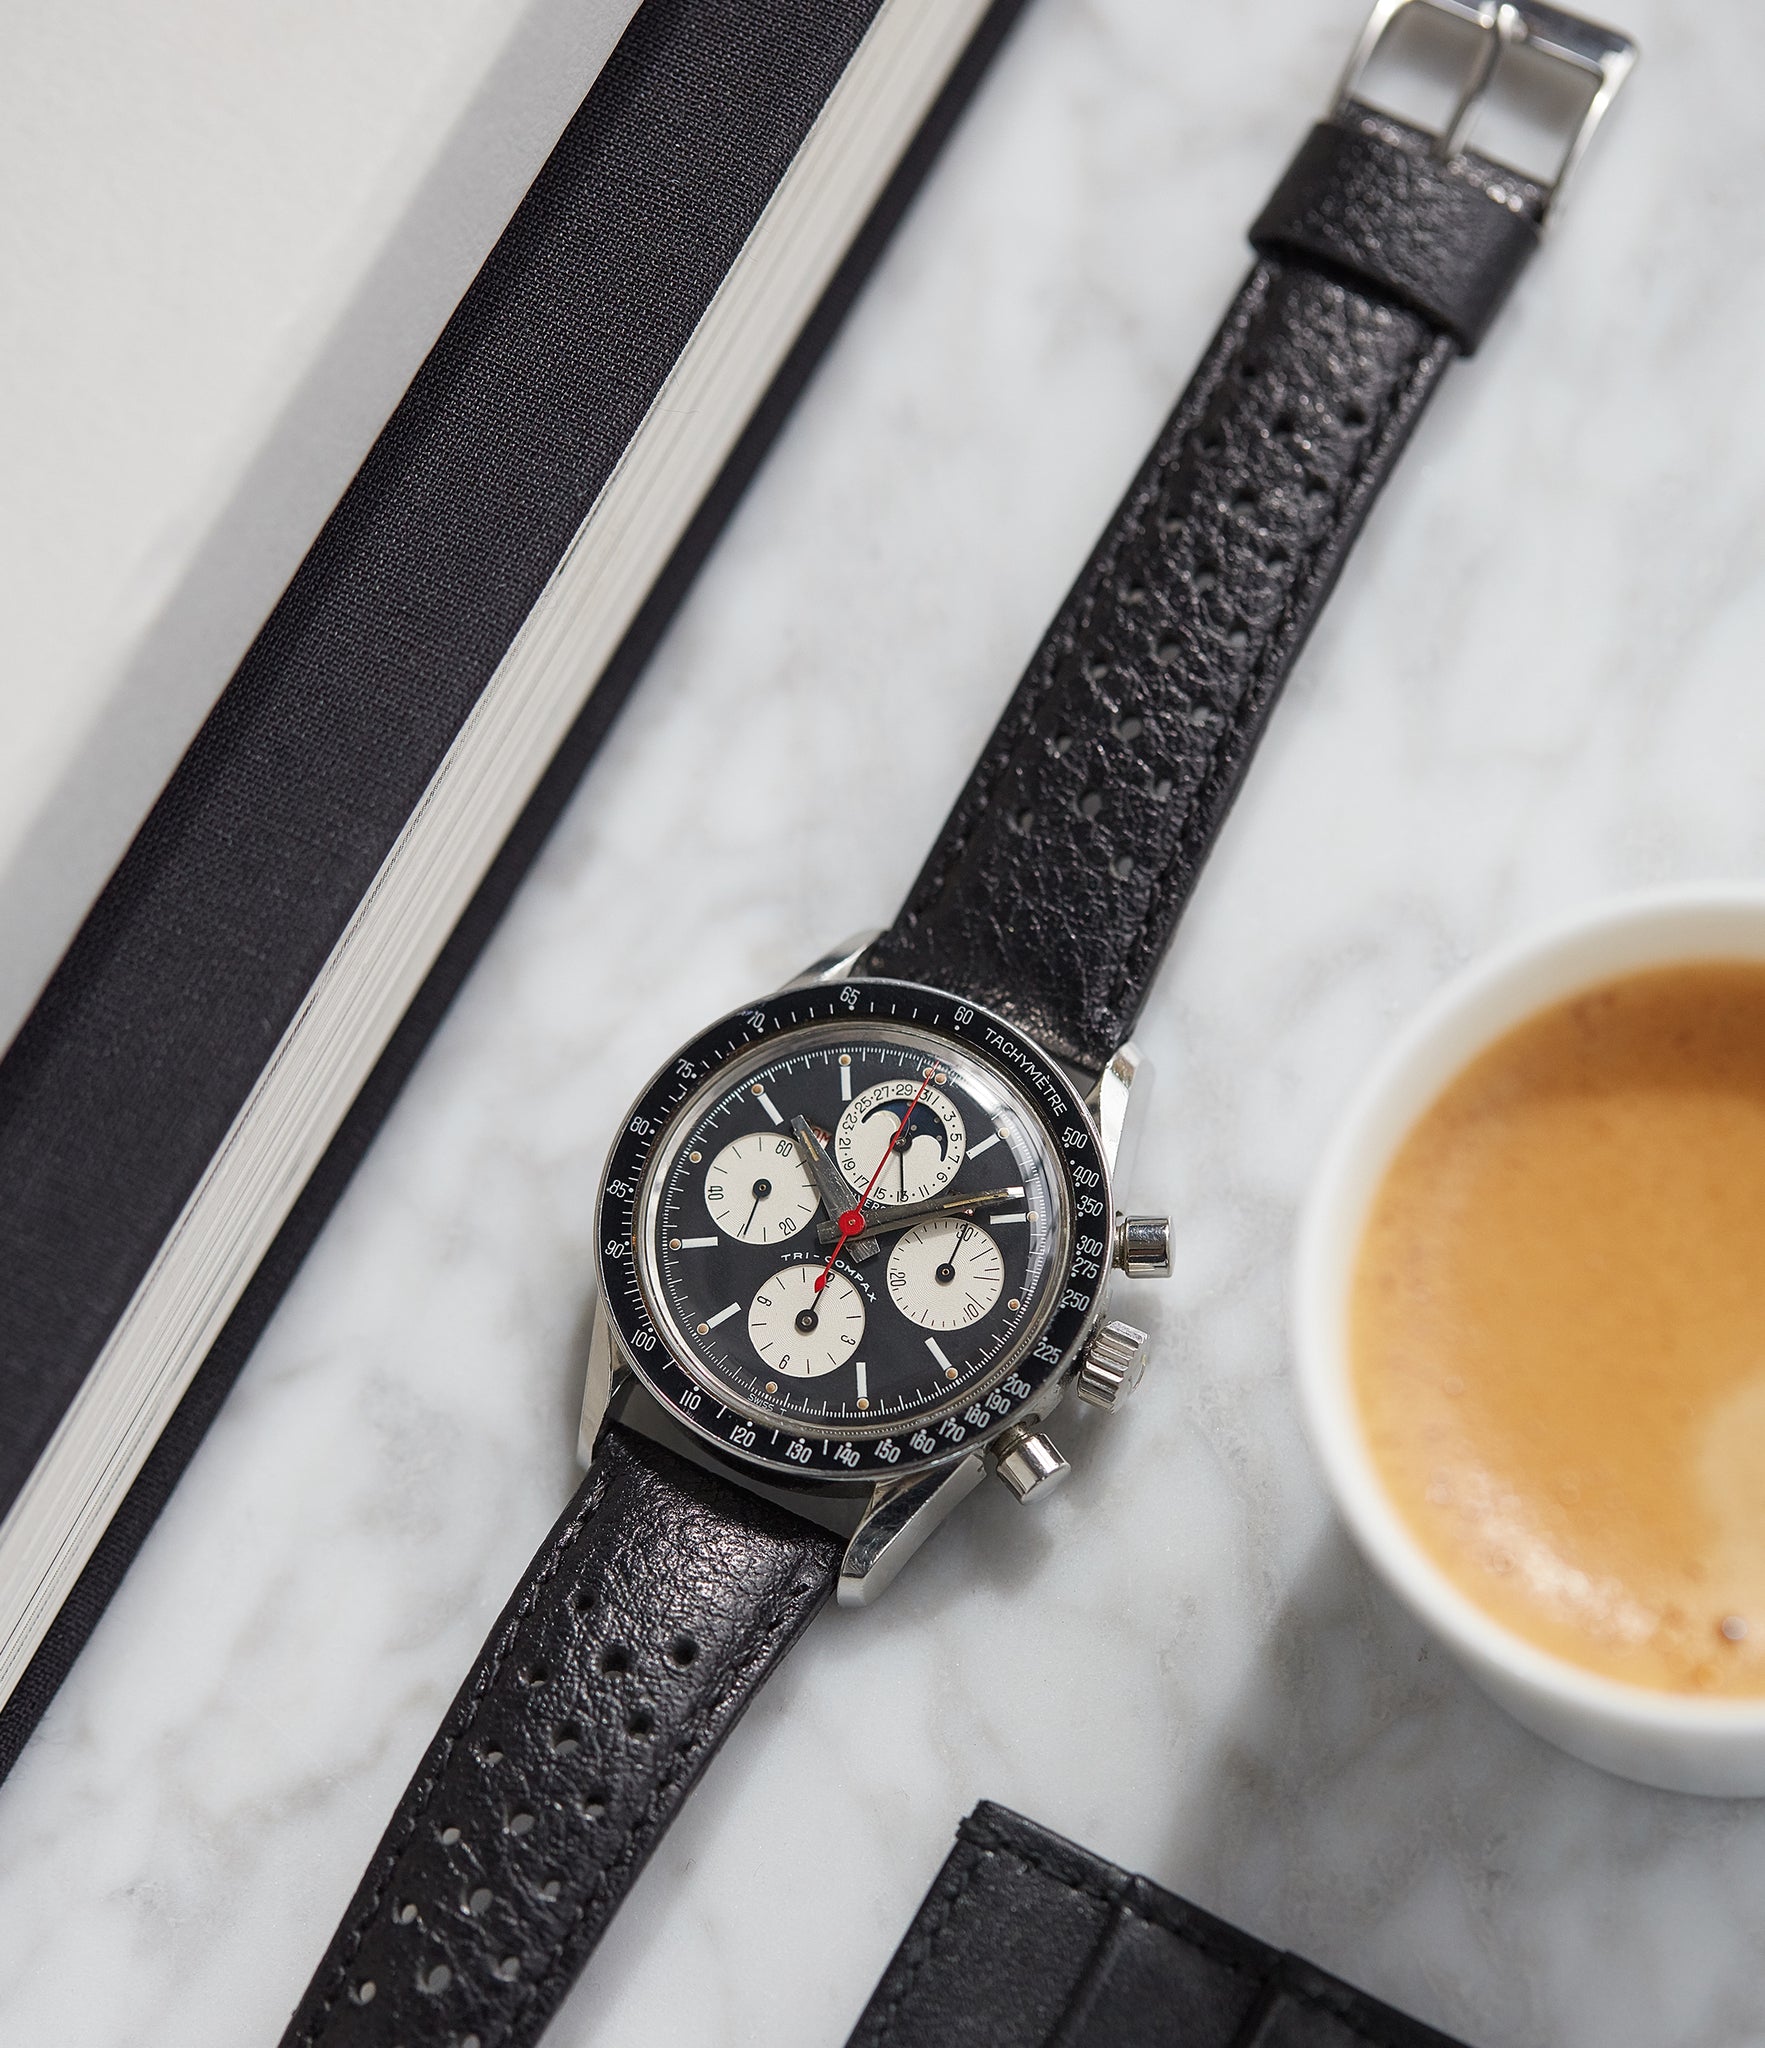 rare vintage watch Eric Clapton 881101/02 Universal Geneve Tri-Compax black dial vintage steel chronograph for sale online at A Collected Man London UK specialist of rare watches